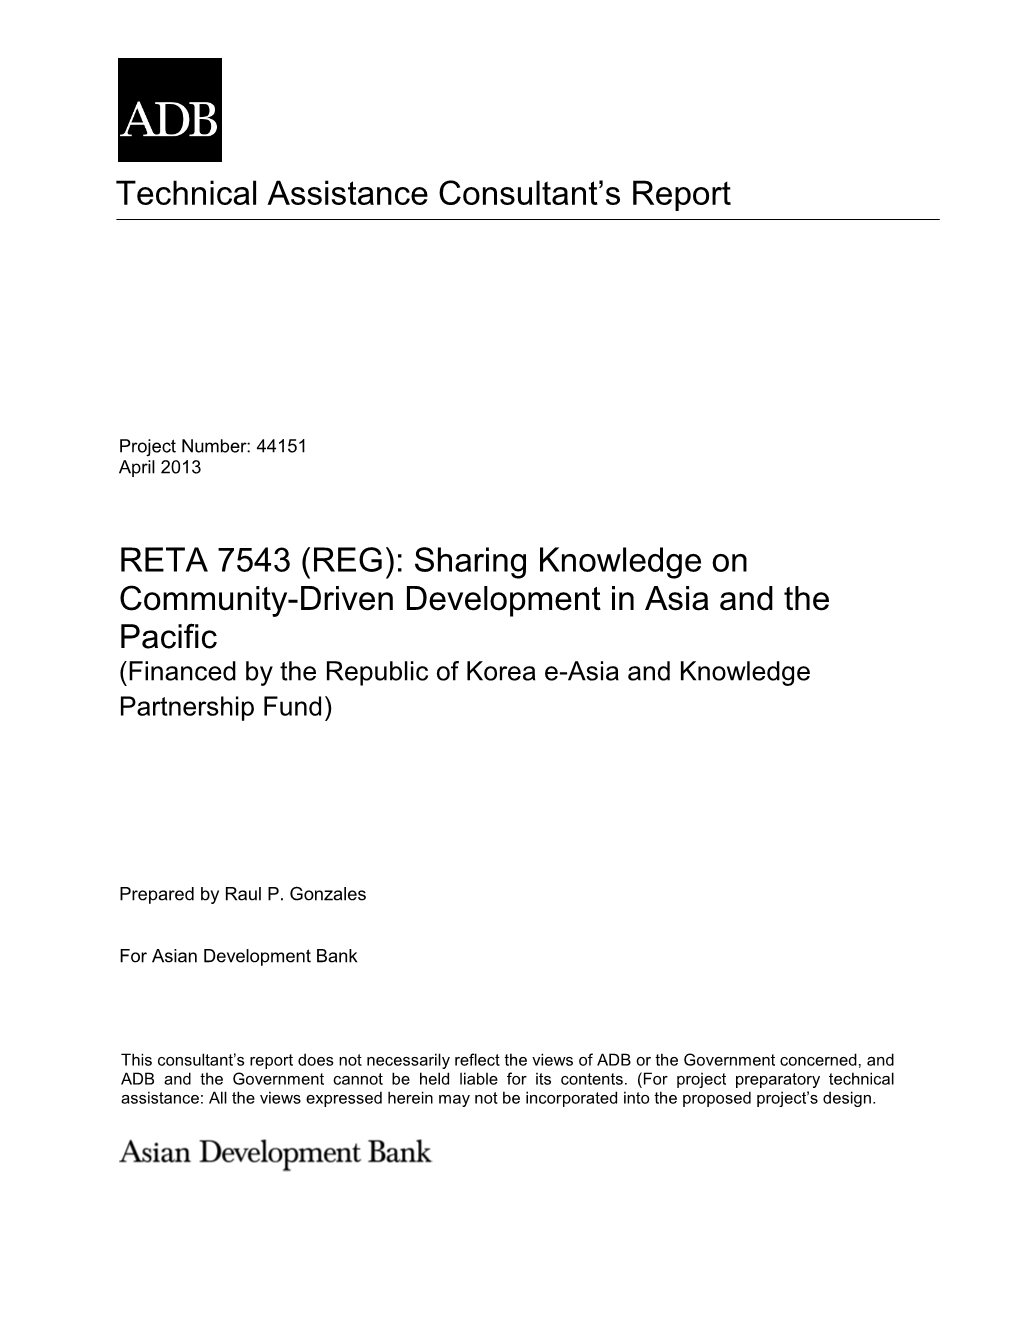 REG): Sharing Knowledge on Community-Driven Development in Asia and the Pacific (Financed by the Republic of Korea E-Asia and Knowledge Partnership Fund)